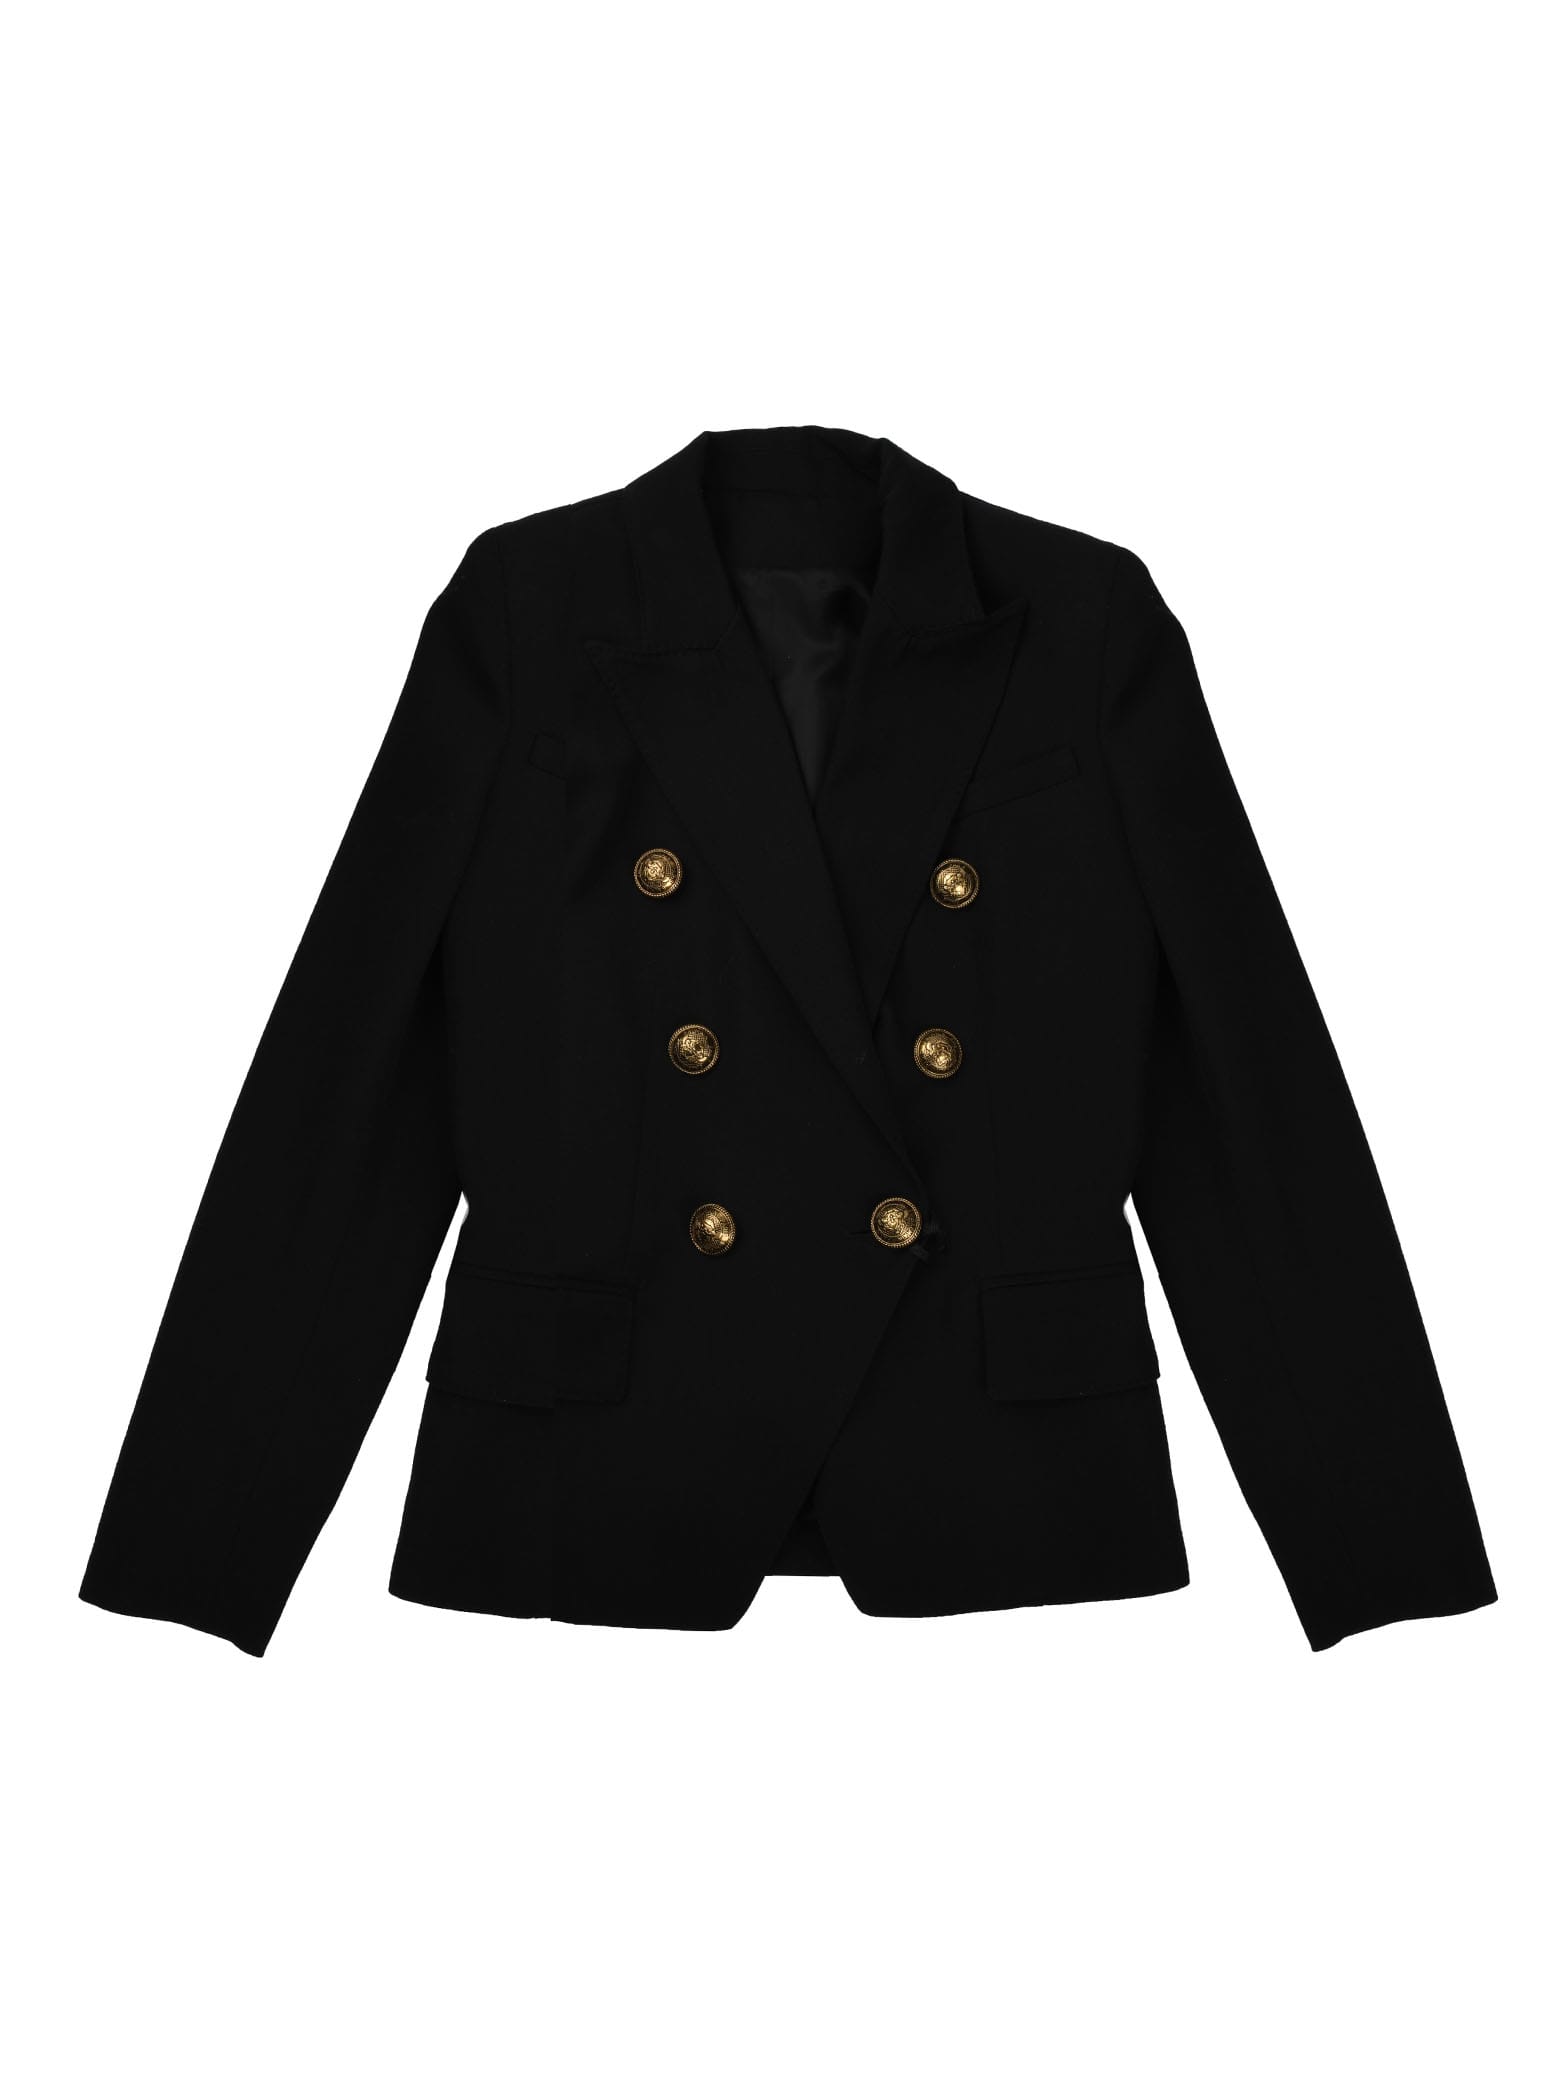 Balmain Double-breasted Black Jacket With Gold Buttons